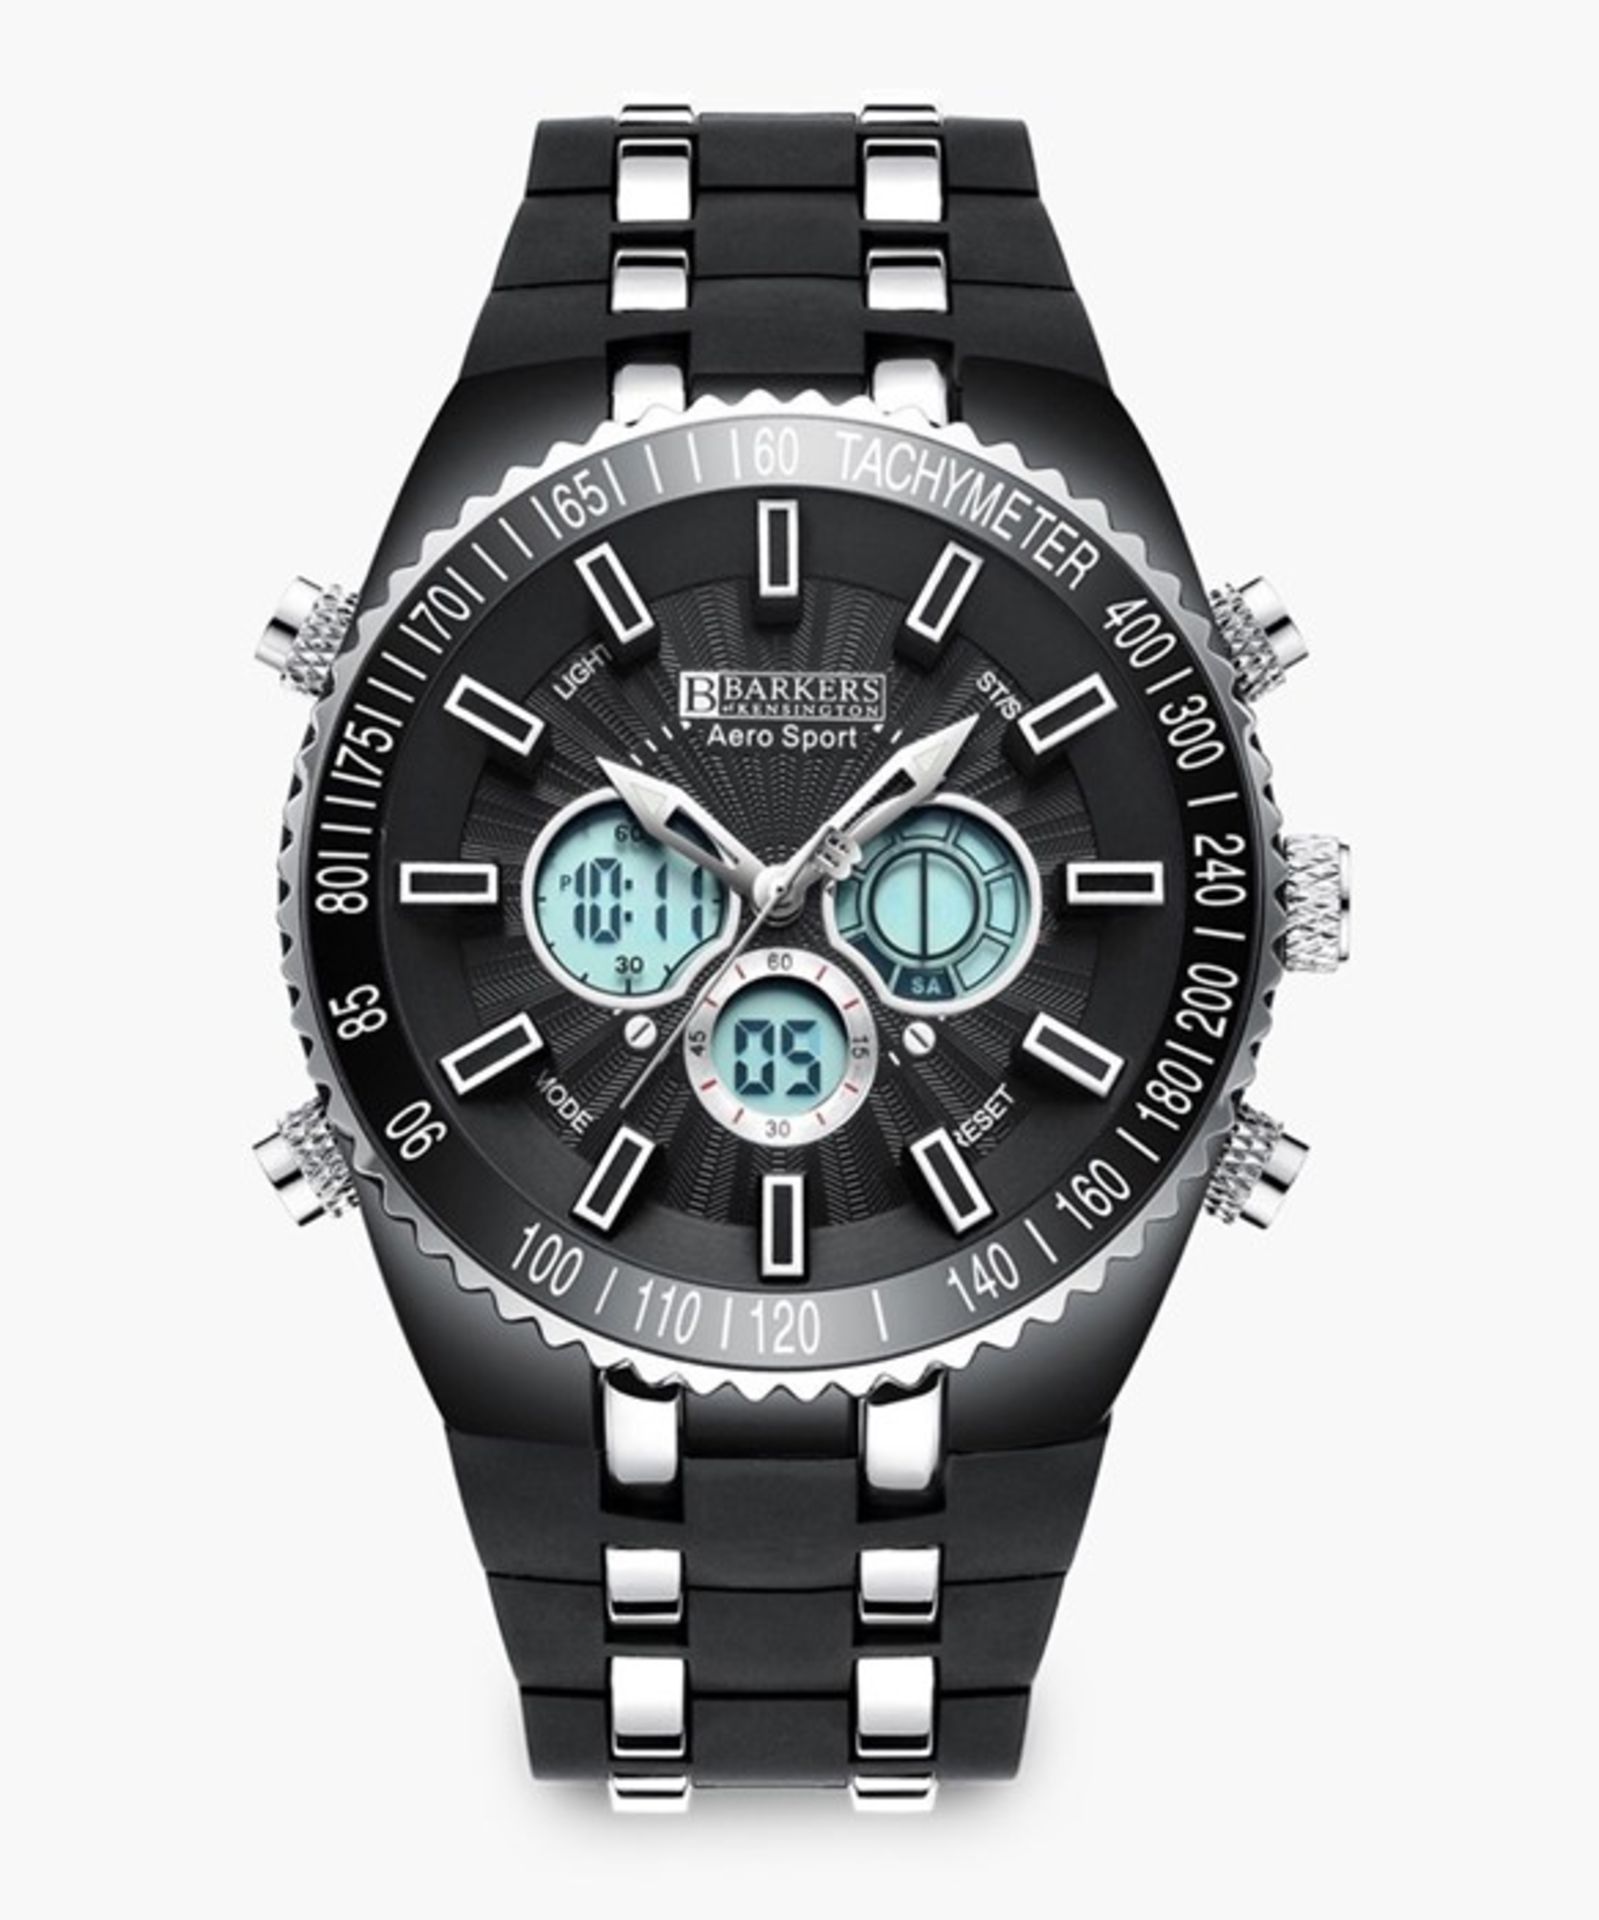 Barkers of Kensington Aero Black & Silver-Tone Watch Sport Watch. New and Boxed with a 5 year